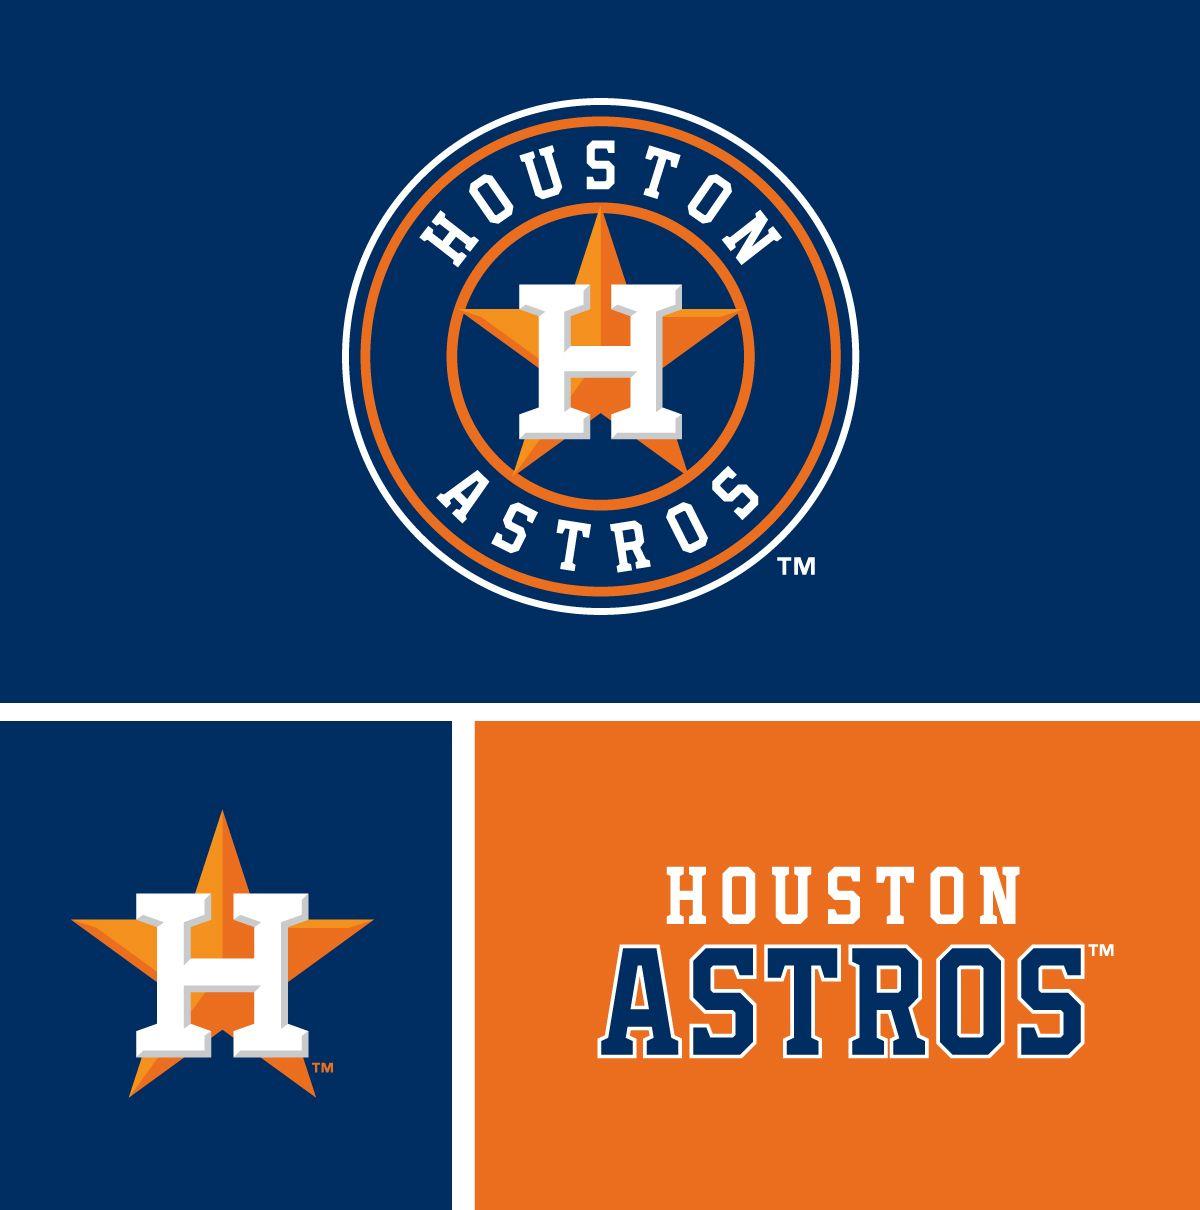 Astros iPhone wallpapers : Astros